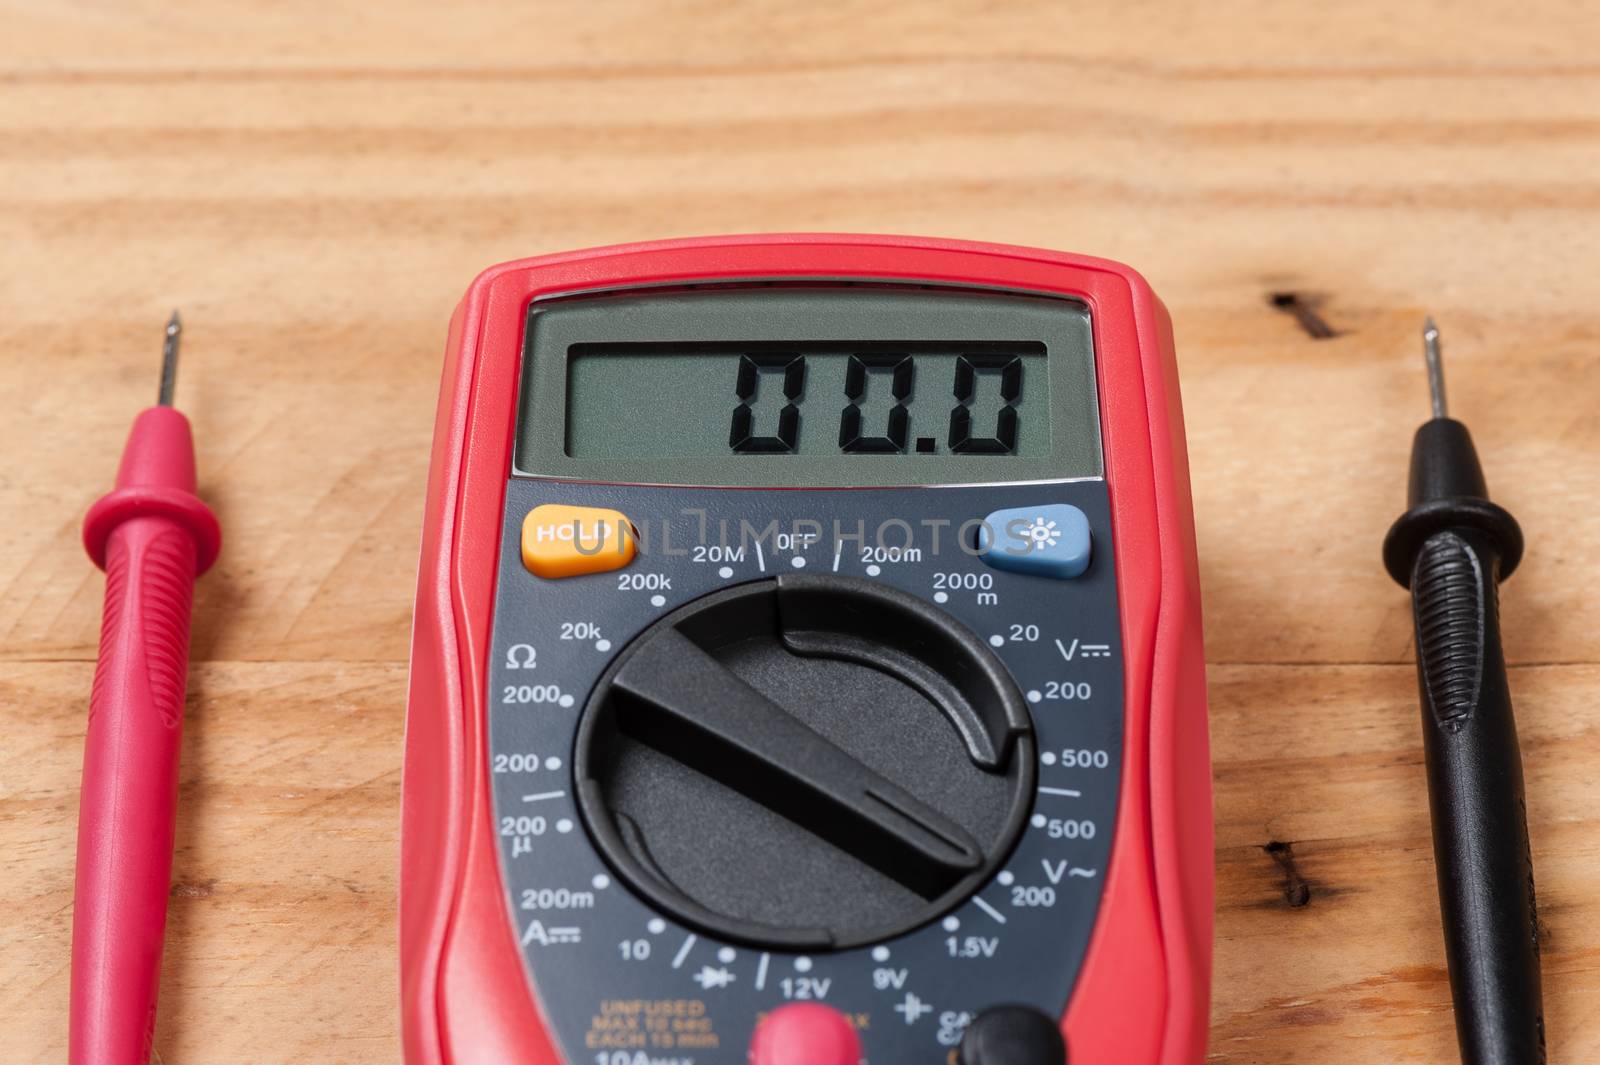 digital multimeter or multitester or Volt-Ohm meter, an electronic measuring instrument that combines several measurement functions in one unit.